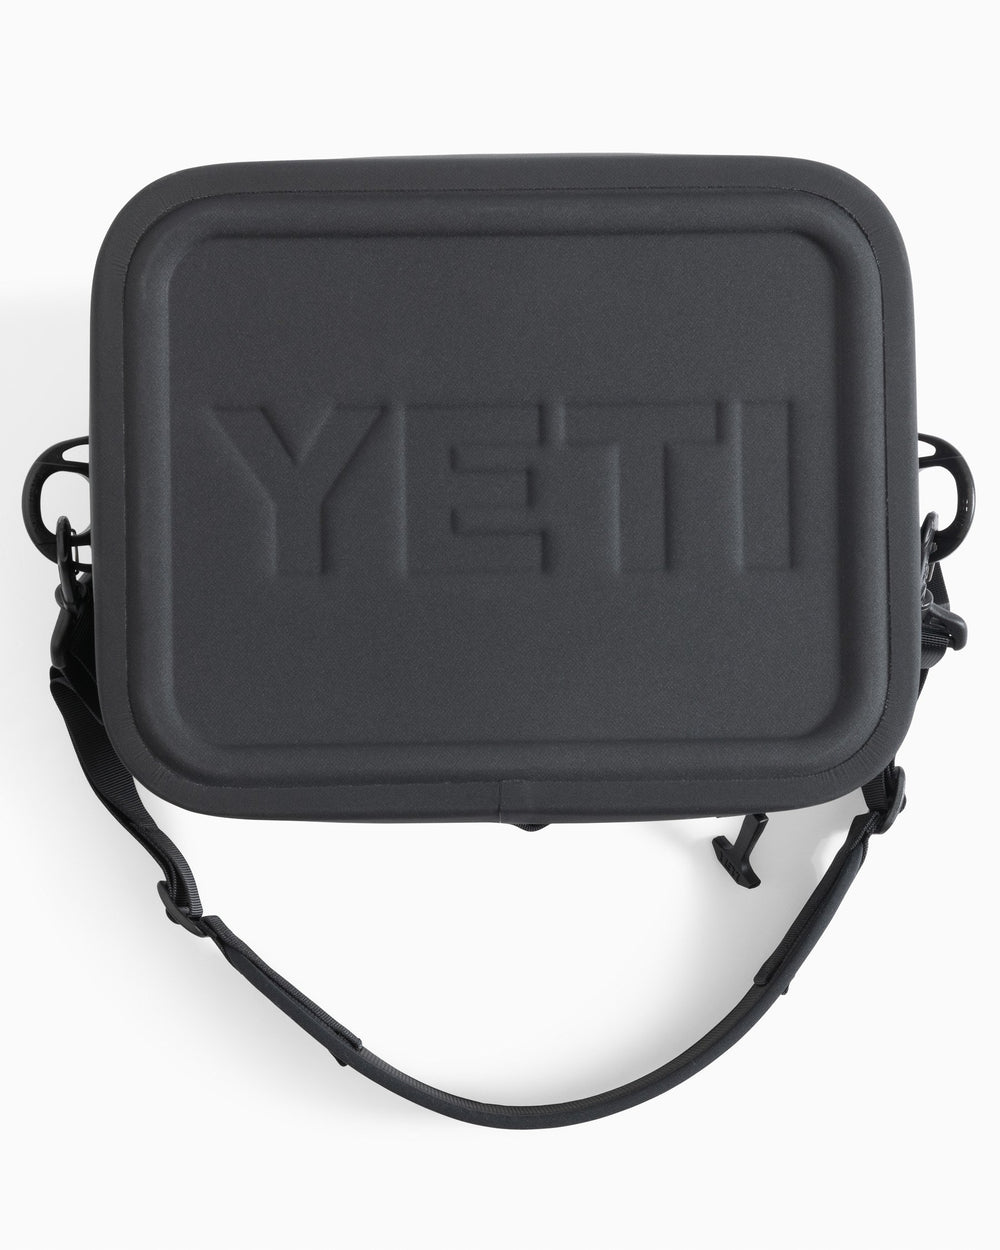 Field Tested: Yeti's Brand New Hopper Flip 12 - Expedition Portal